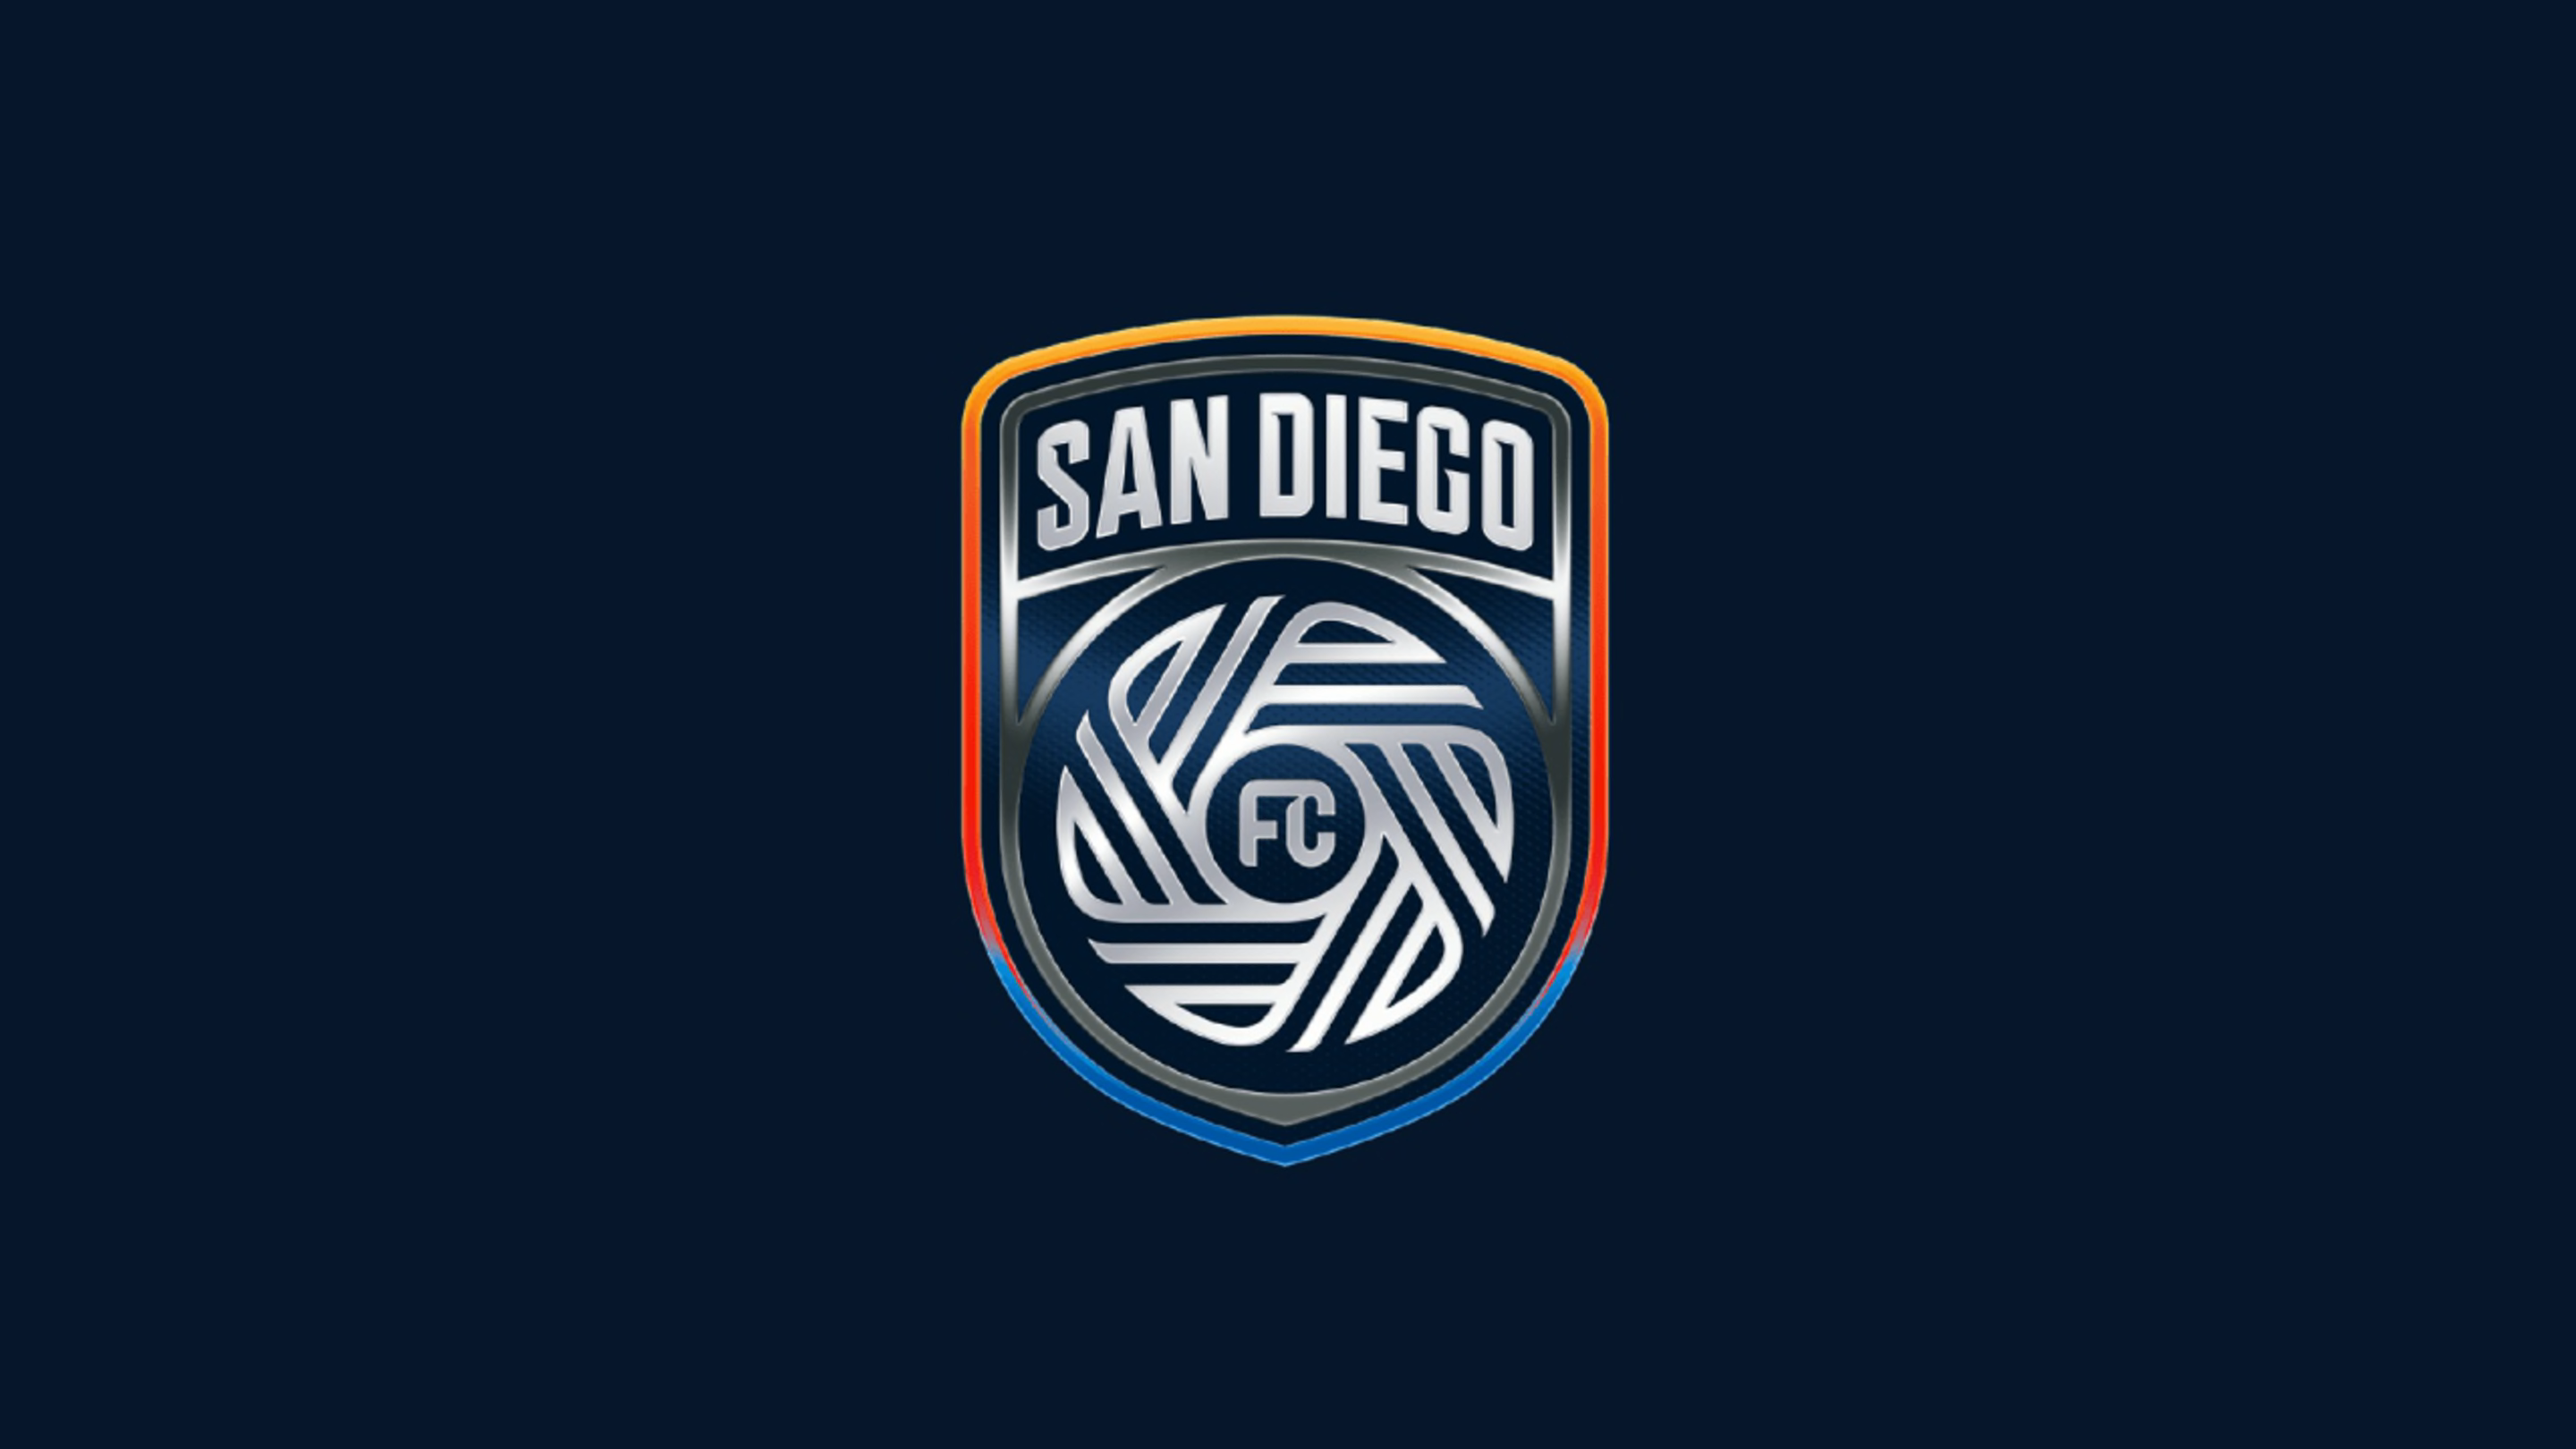 Everything we know about San Diego FC so far